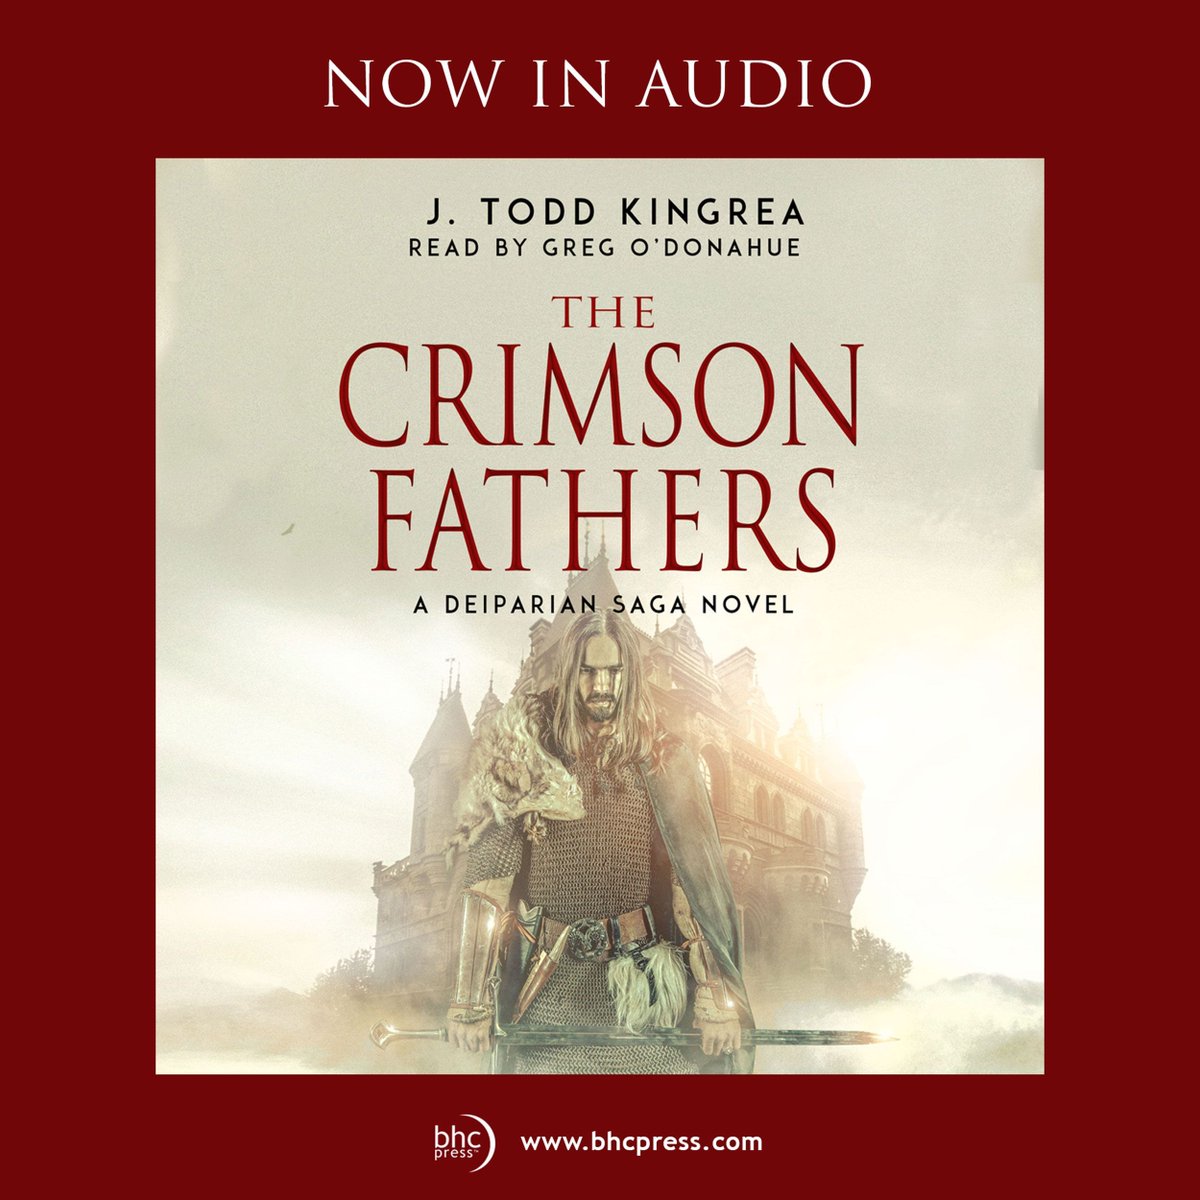 #THECRIMSONFATHERS by @JToddKingrea : With the Fifth Order in complete control of the Church of the Deiparous, Malachi Thorne and friends must find a powerful weapon to halt the Crimson Fathers. buff.ly/42iqi5a ⁣ Listen on #audio now #BHCPress #audiobook #fantasybook